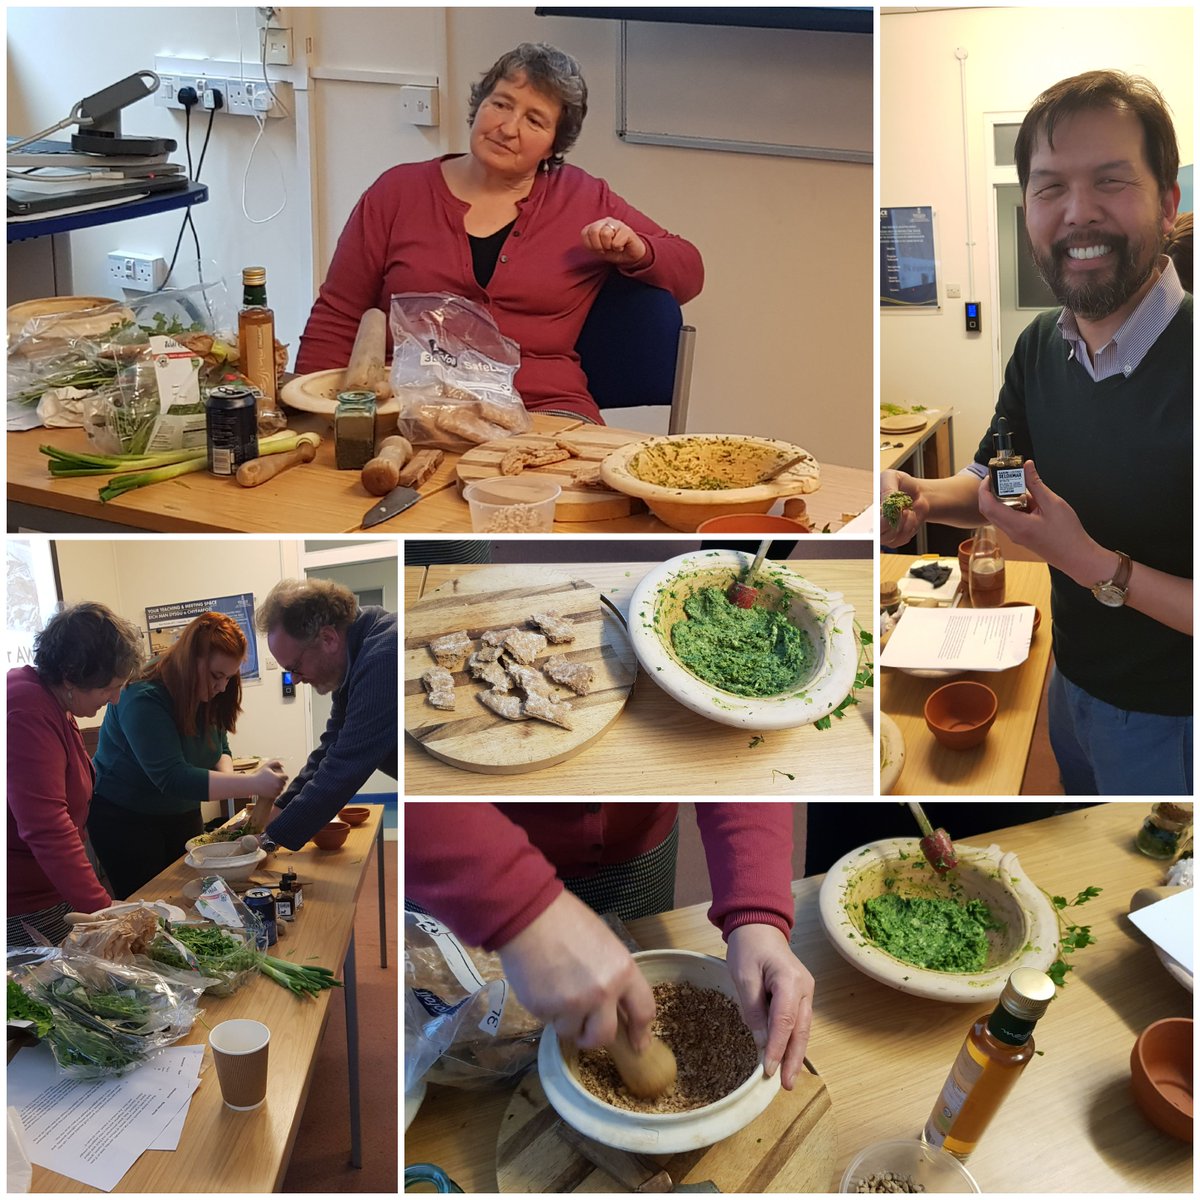 Roman cooking demonstration by Sally Grainger, with some help from members of @SUAncientworld. Ian Goh's workshop on Roman food & drink #WineAndPickles was fabulous! Congratulations, @iklg2! #RomanFood #RomanWine @suculture_comm Find Sally Grainger at atasteoftheancientworld.co.uk